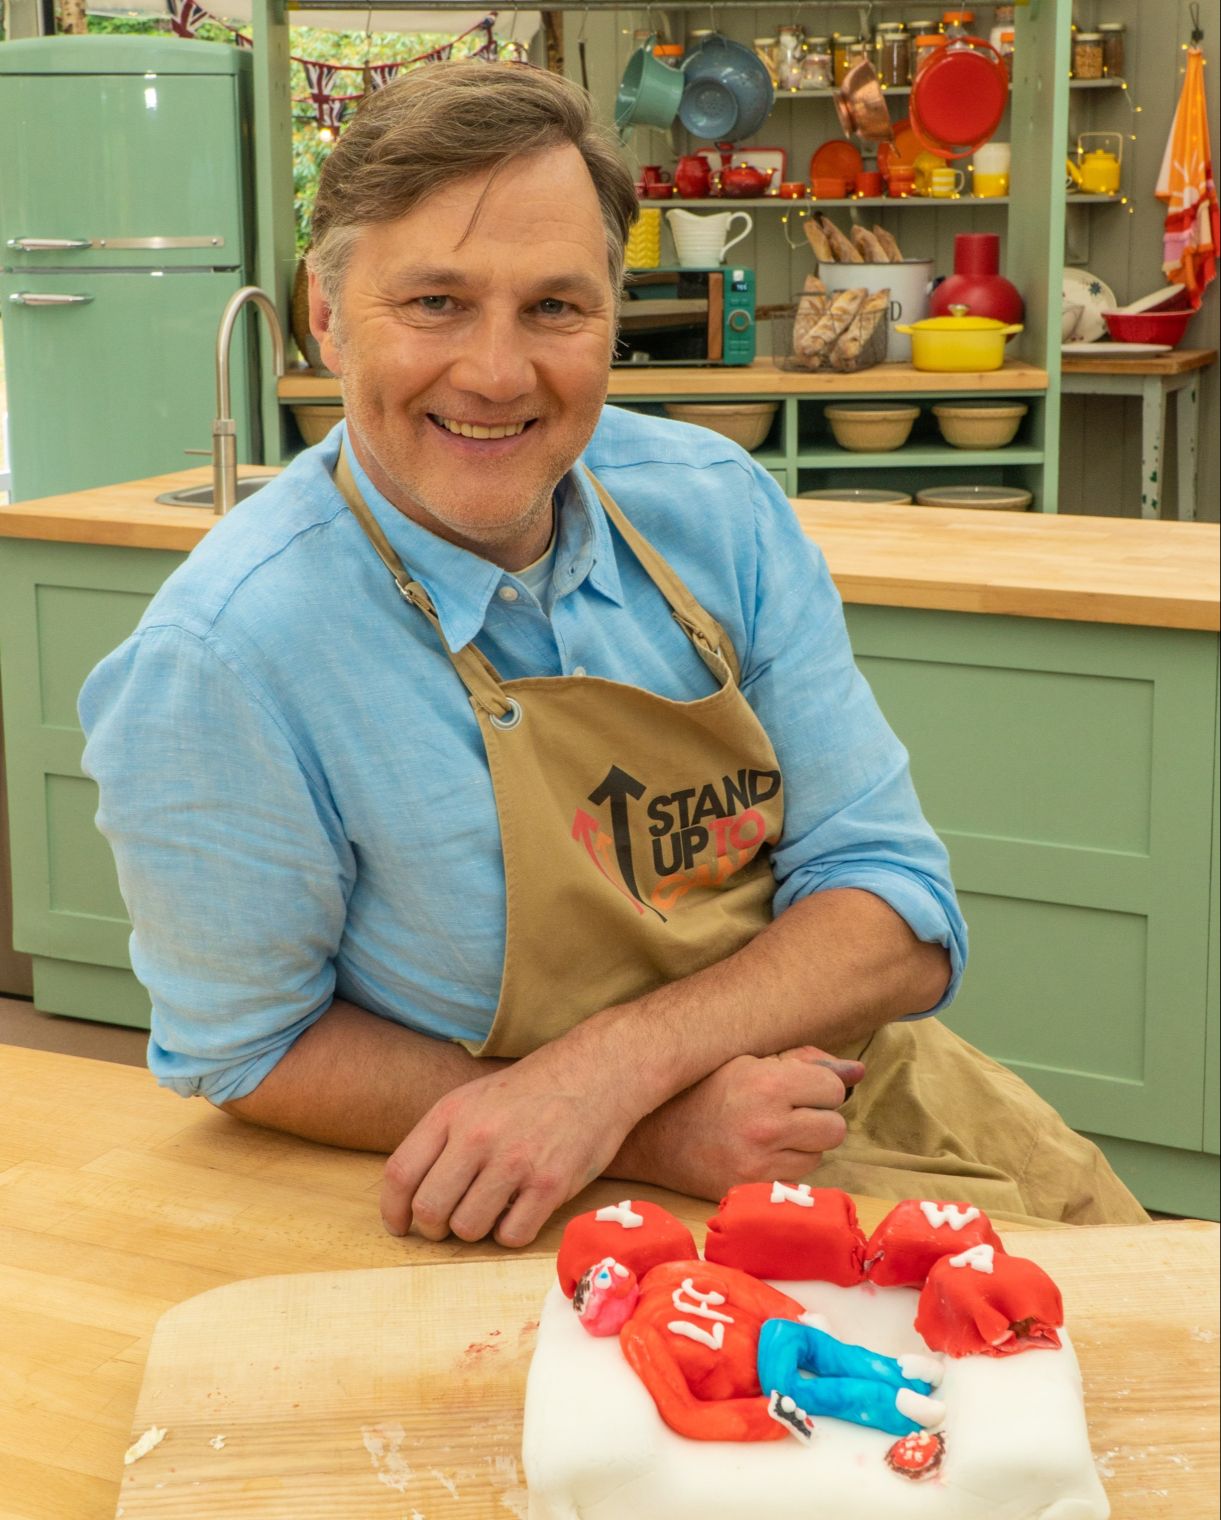 David Morrissey has won Star Baker in Week 3 of The Great Stand Up To Cancer Bake Off